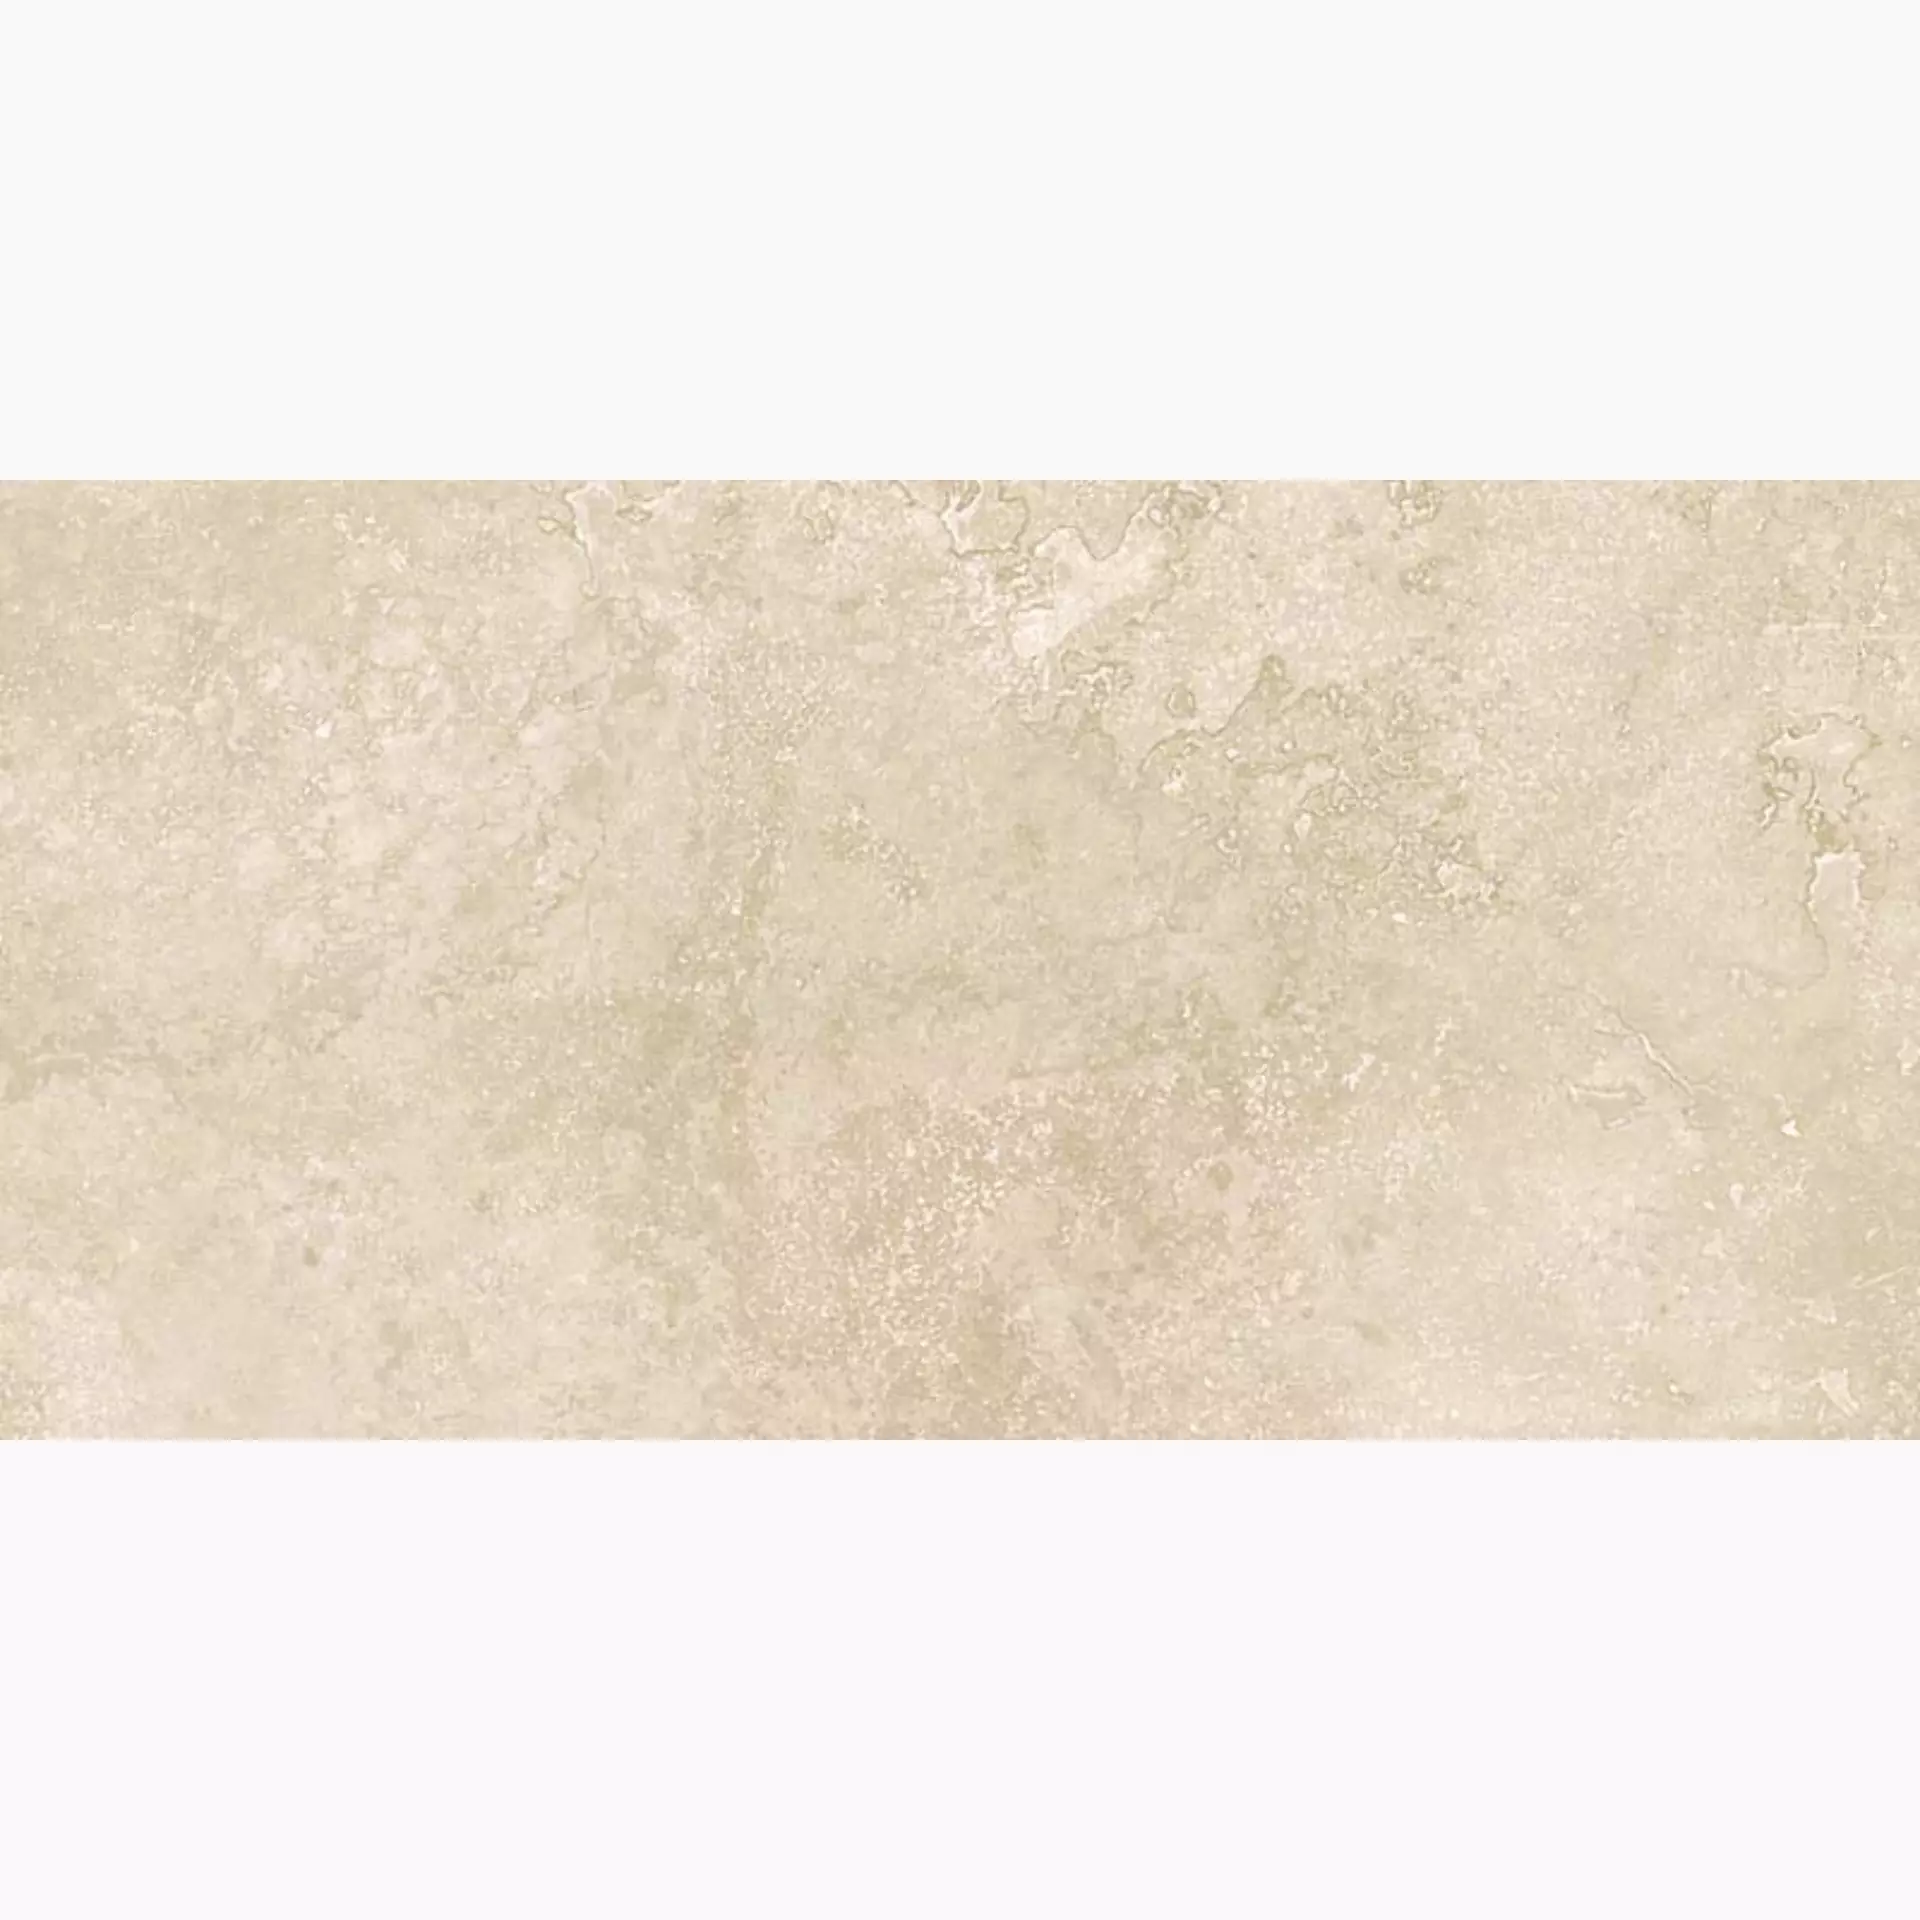 Sant Agostino Via Appia Beige Natural CSAACCBE30 30x60cm rectified 10mm